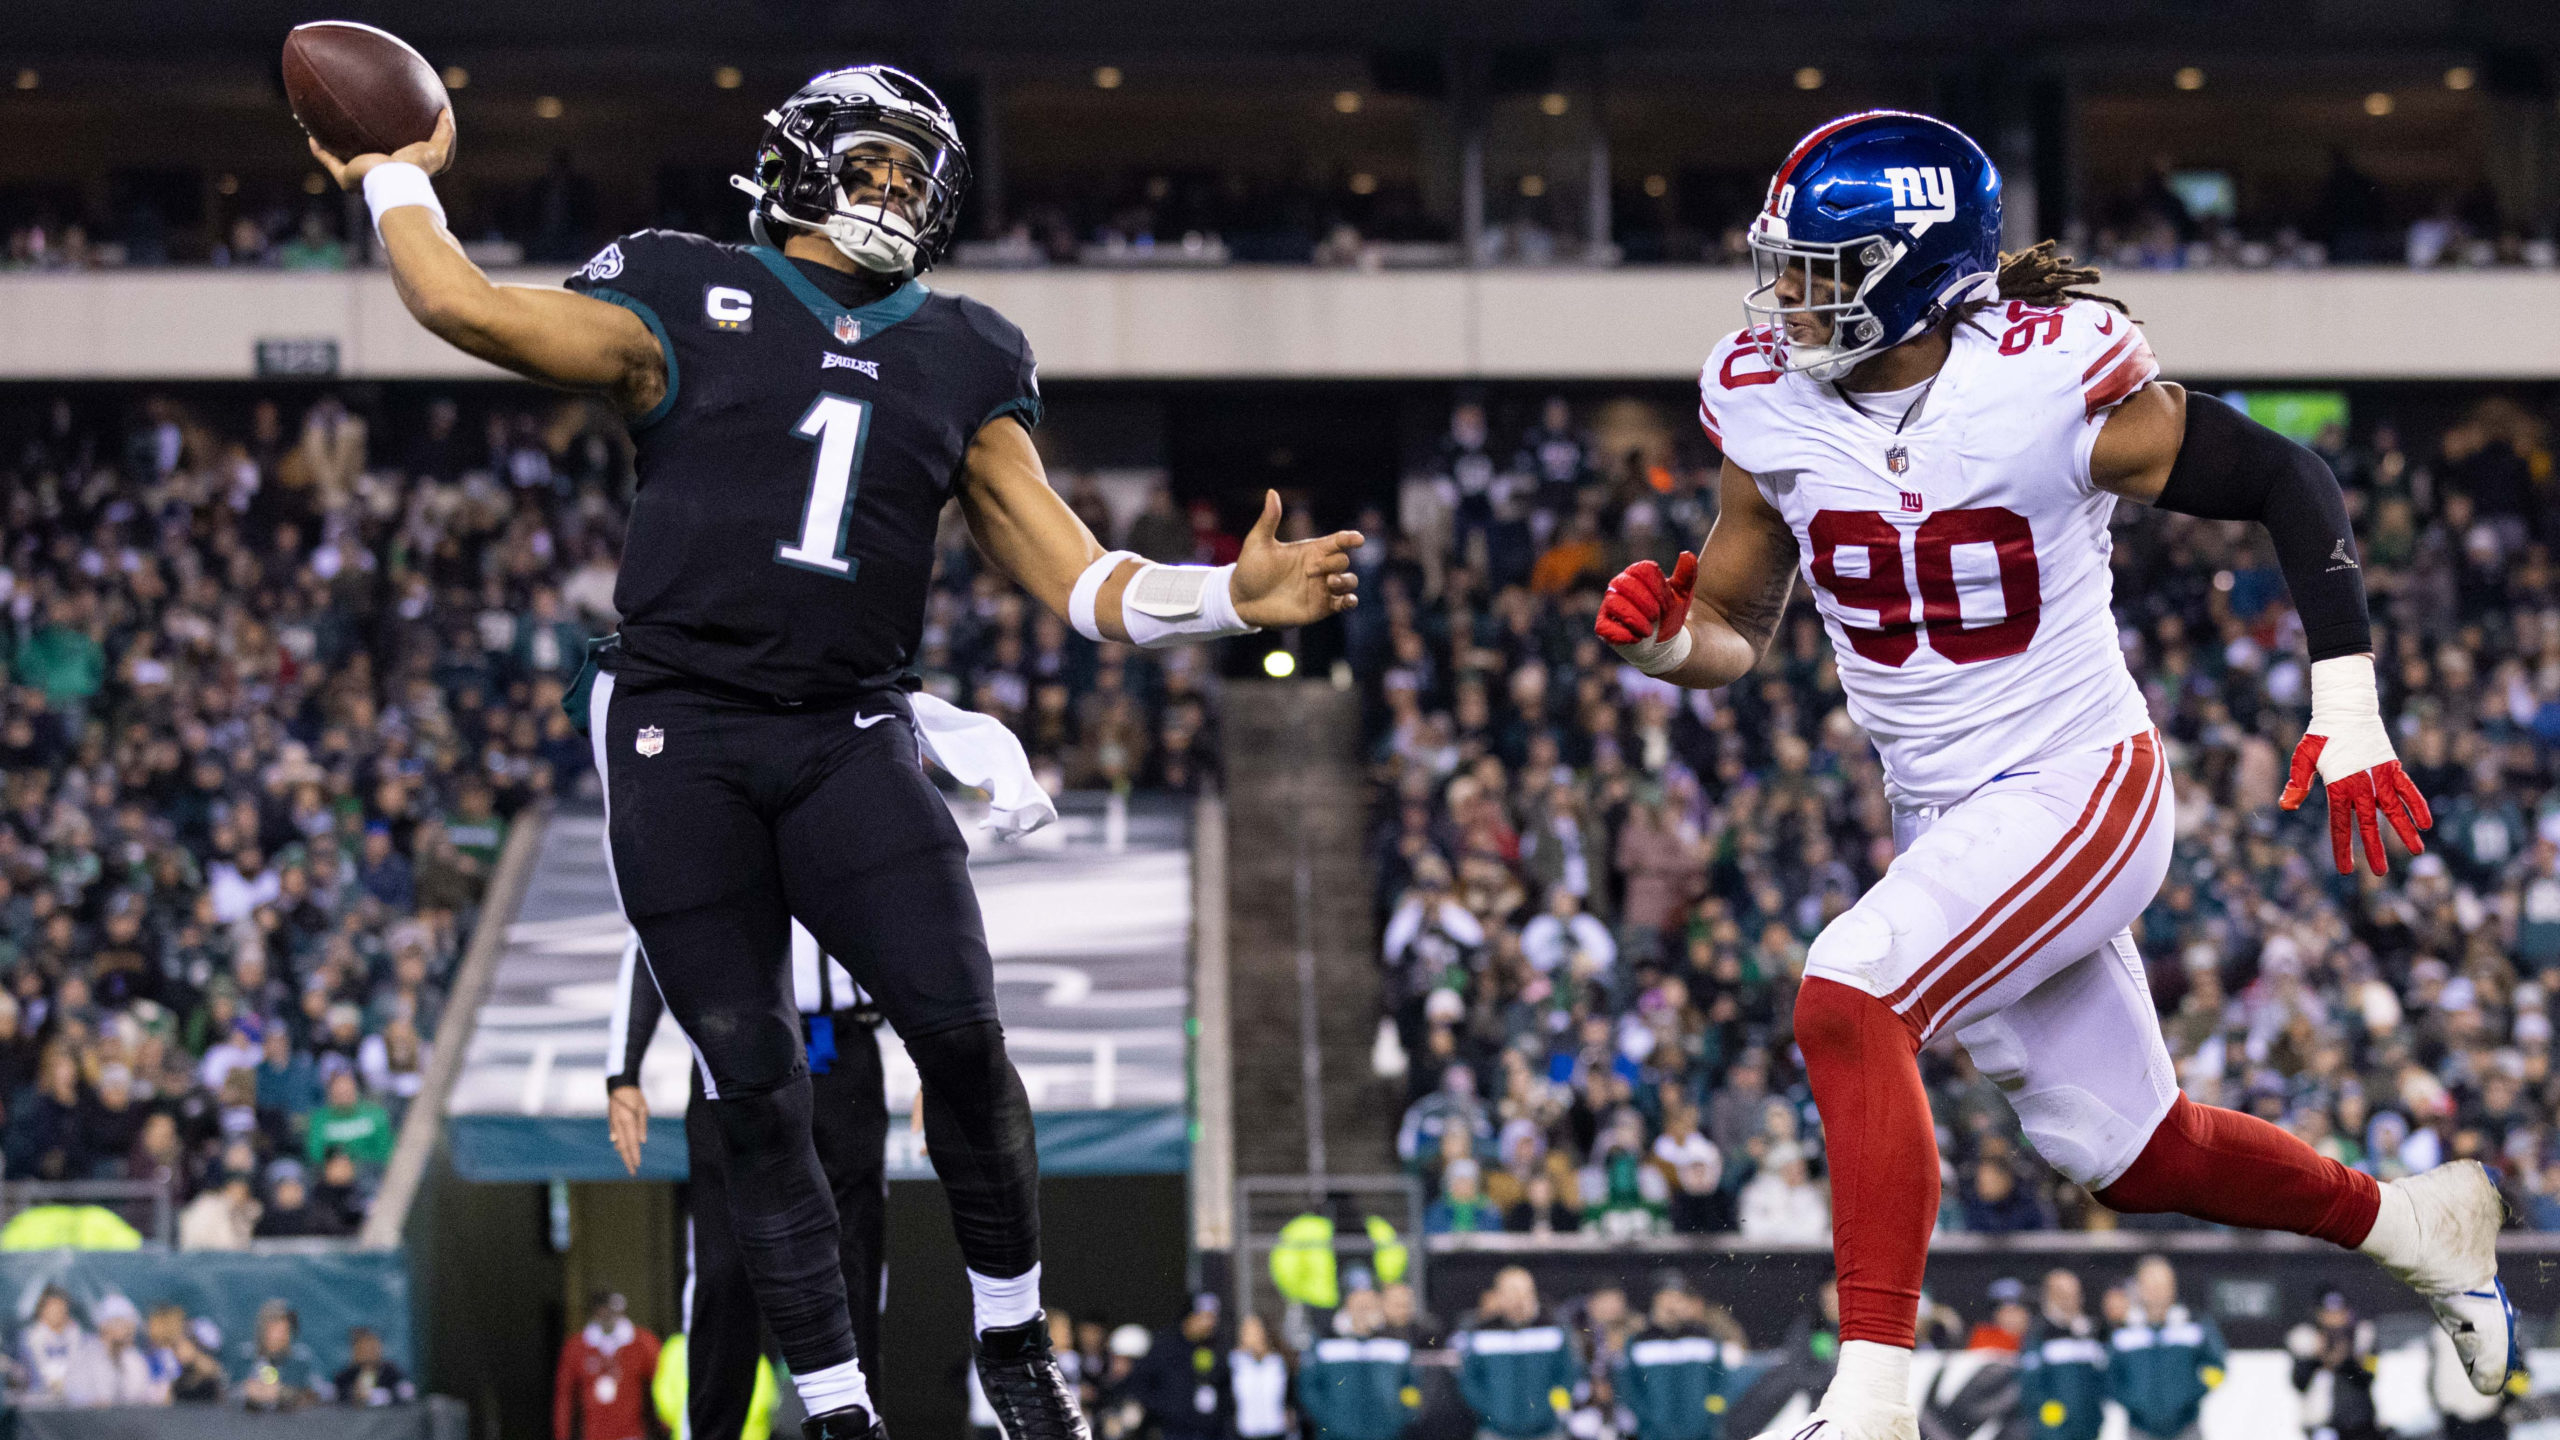 To Win Divisional Rematch, Giants Must Prep as if Hurts Fully Healthy